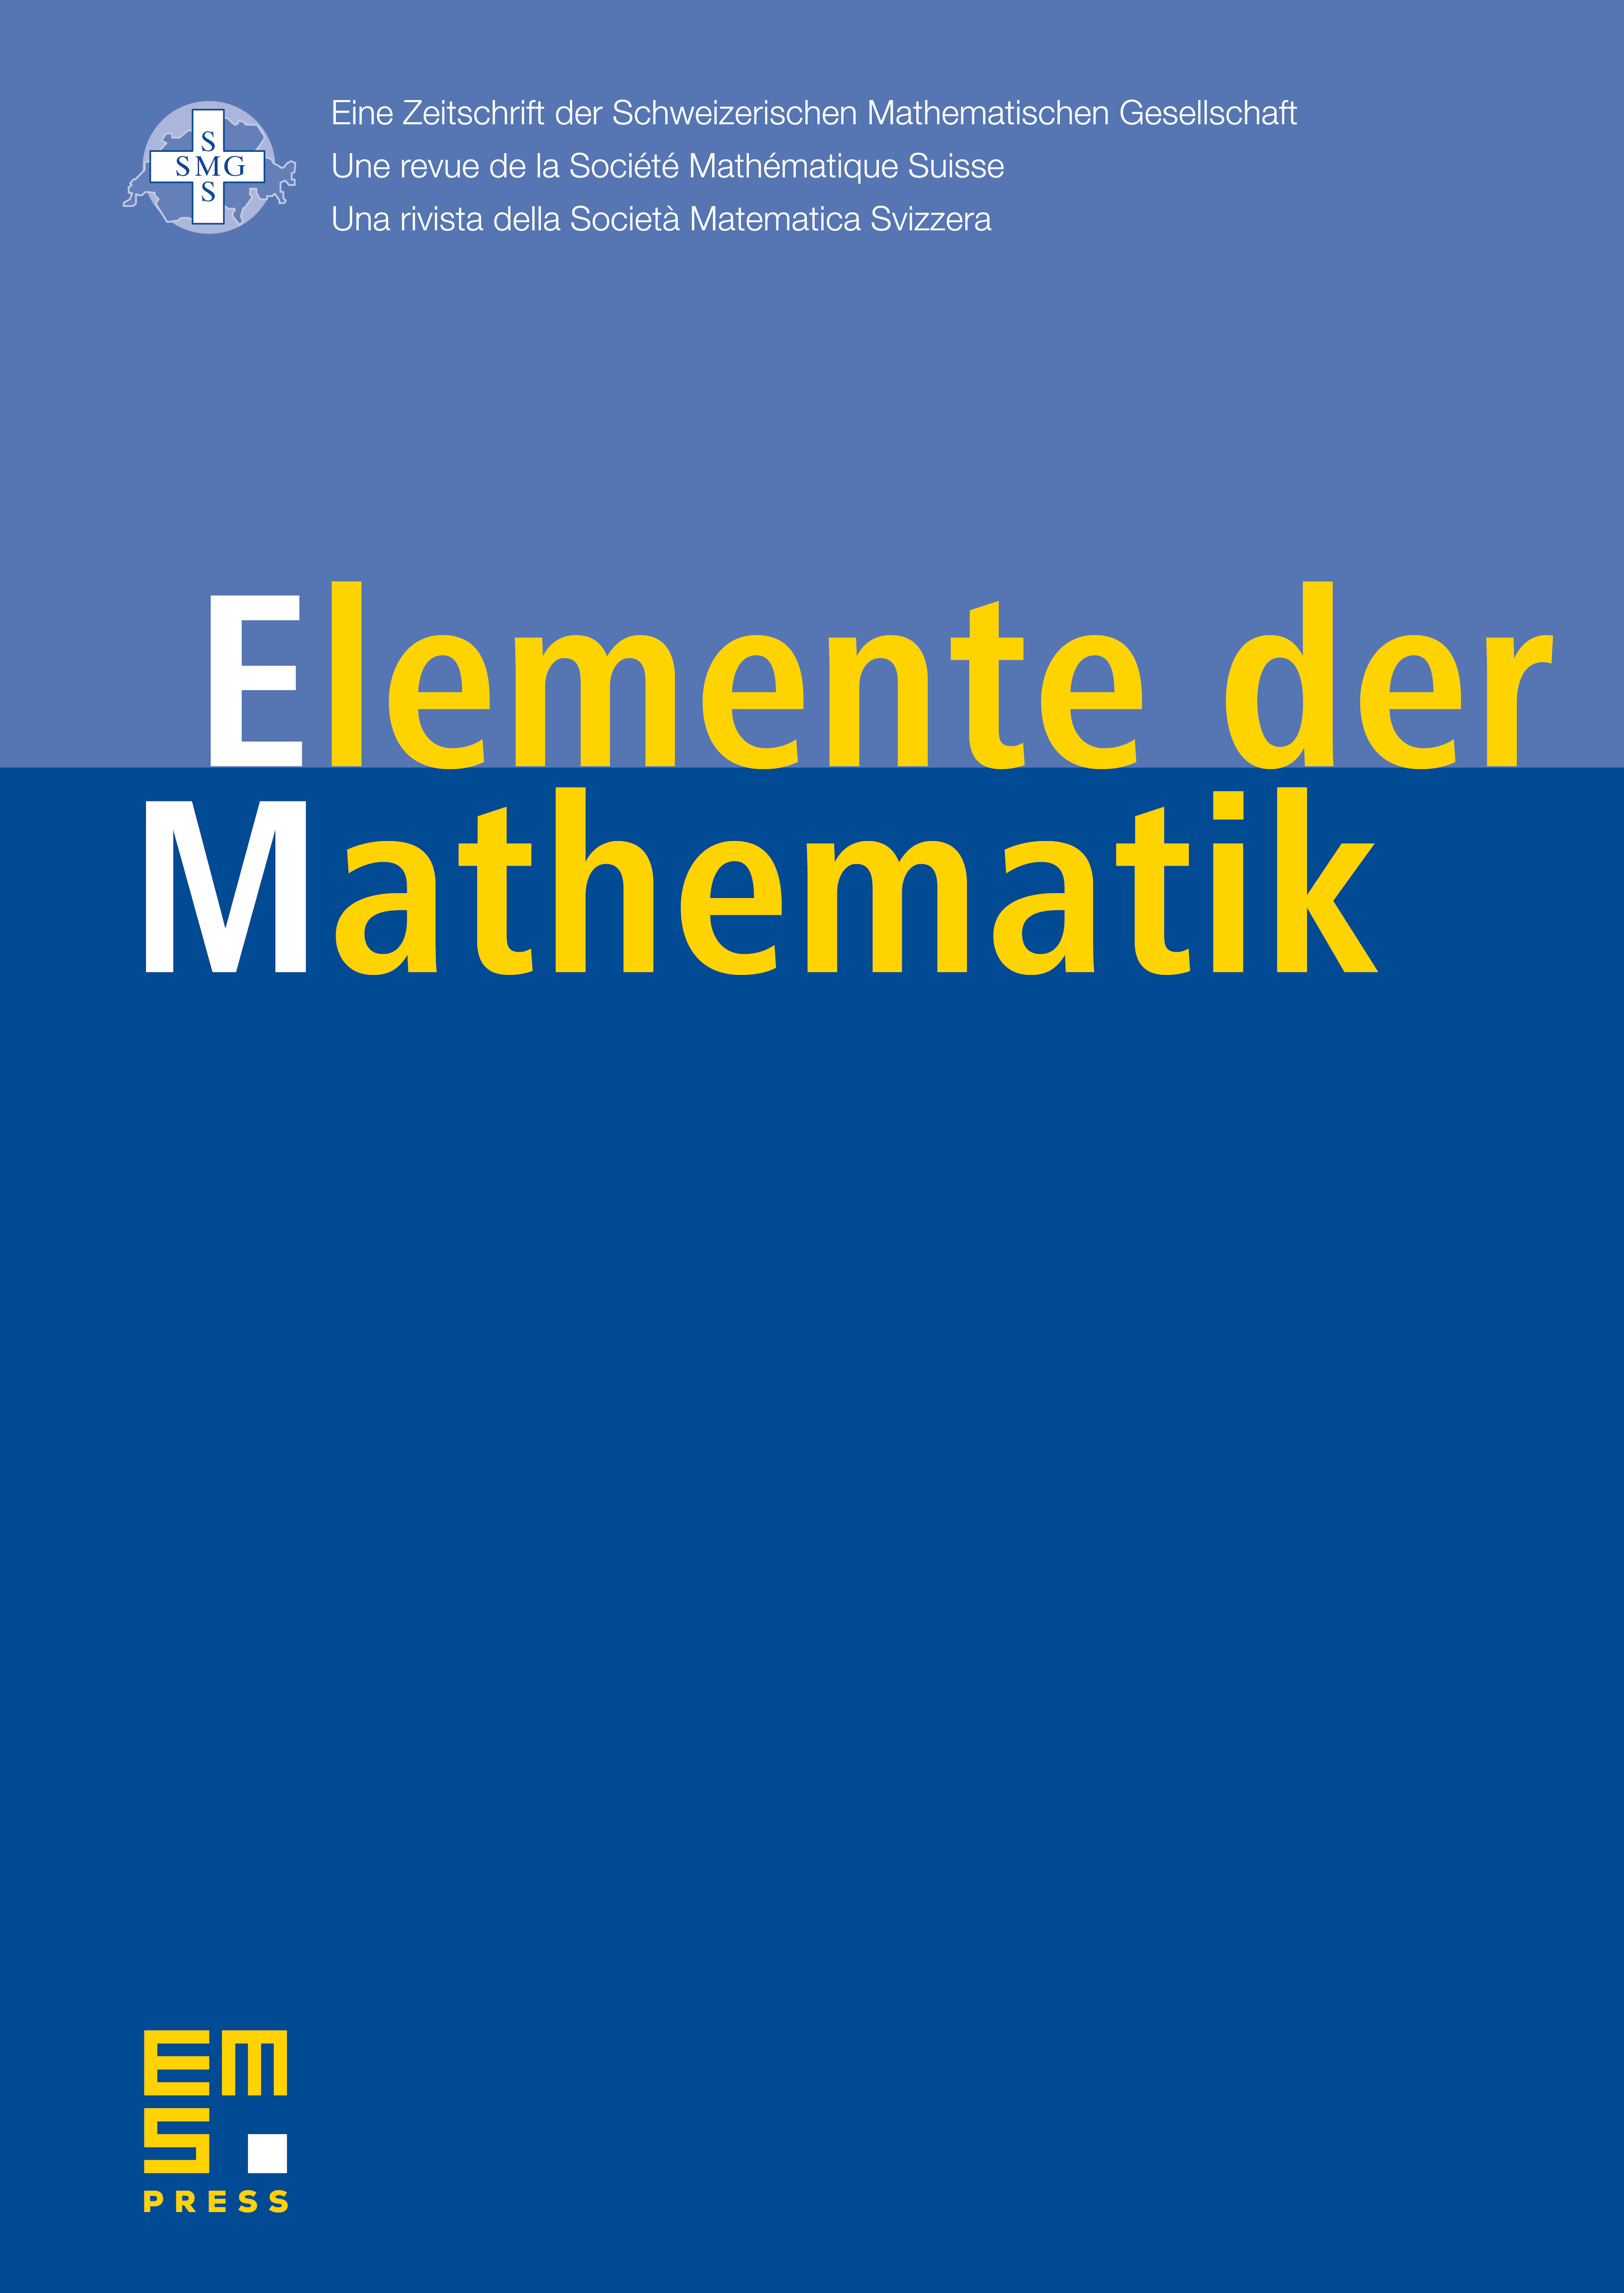 A generalization of Mason's theorem for four polynomials cover